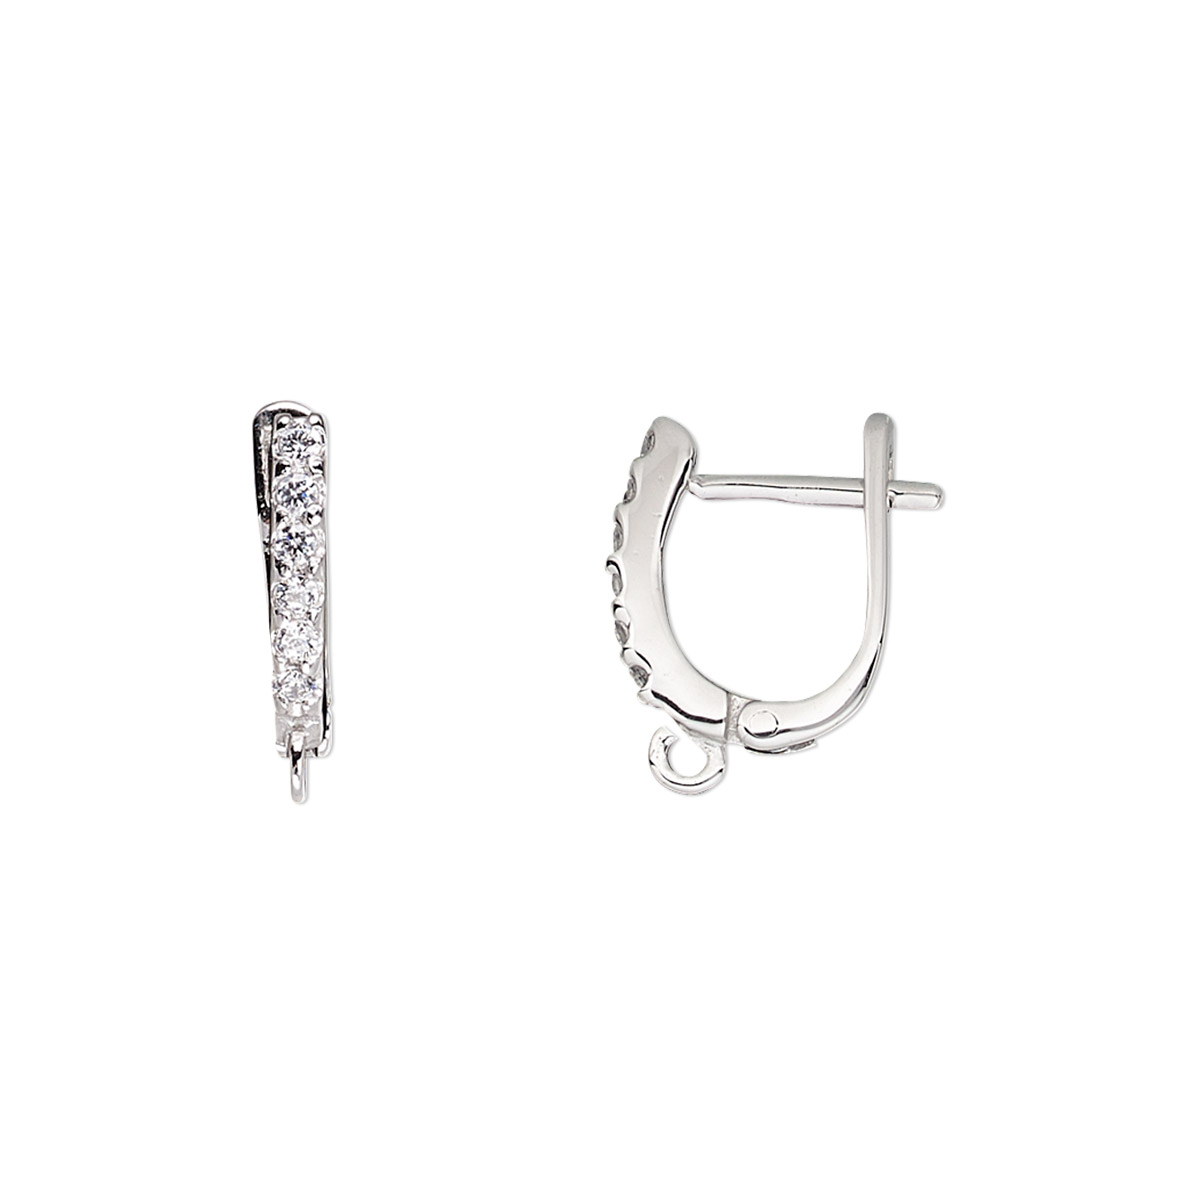 Earring, cubic zirconia and sterling silver, clear, 11mm oval with open ...